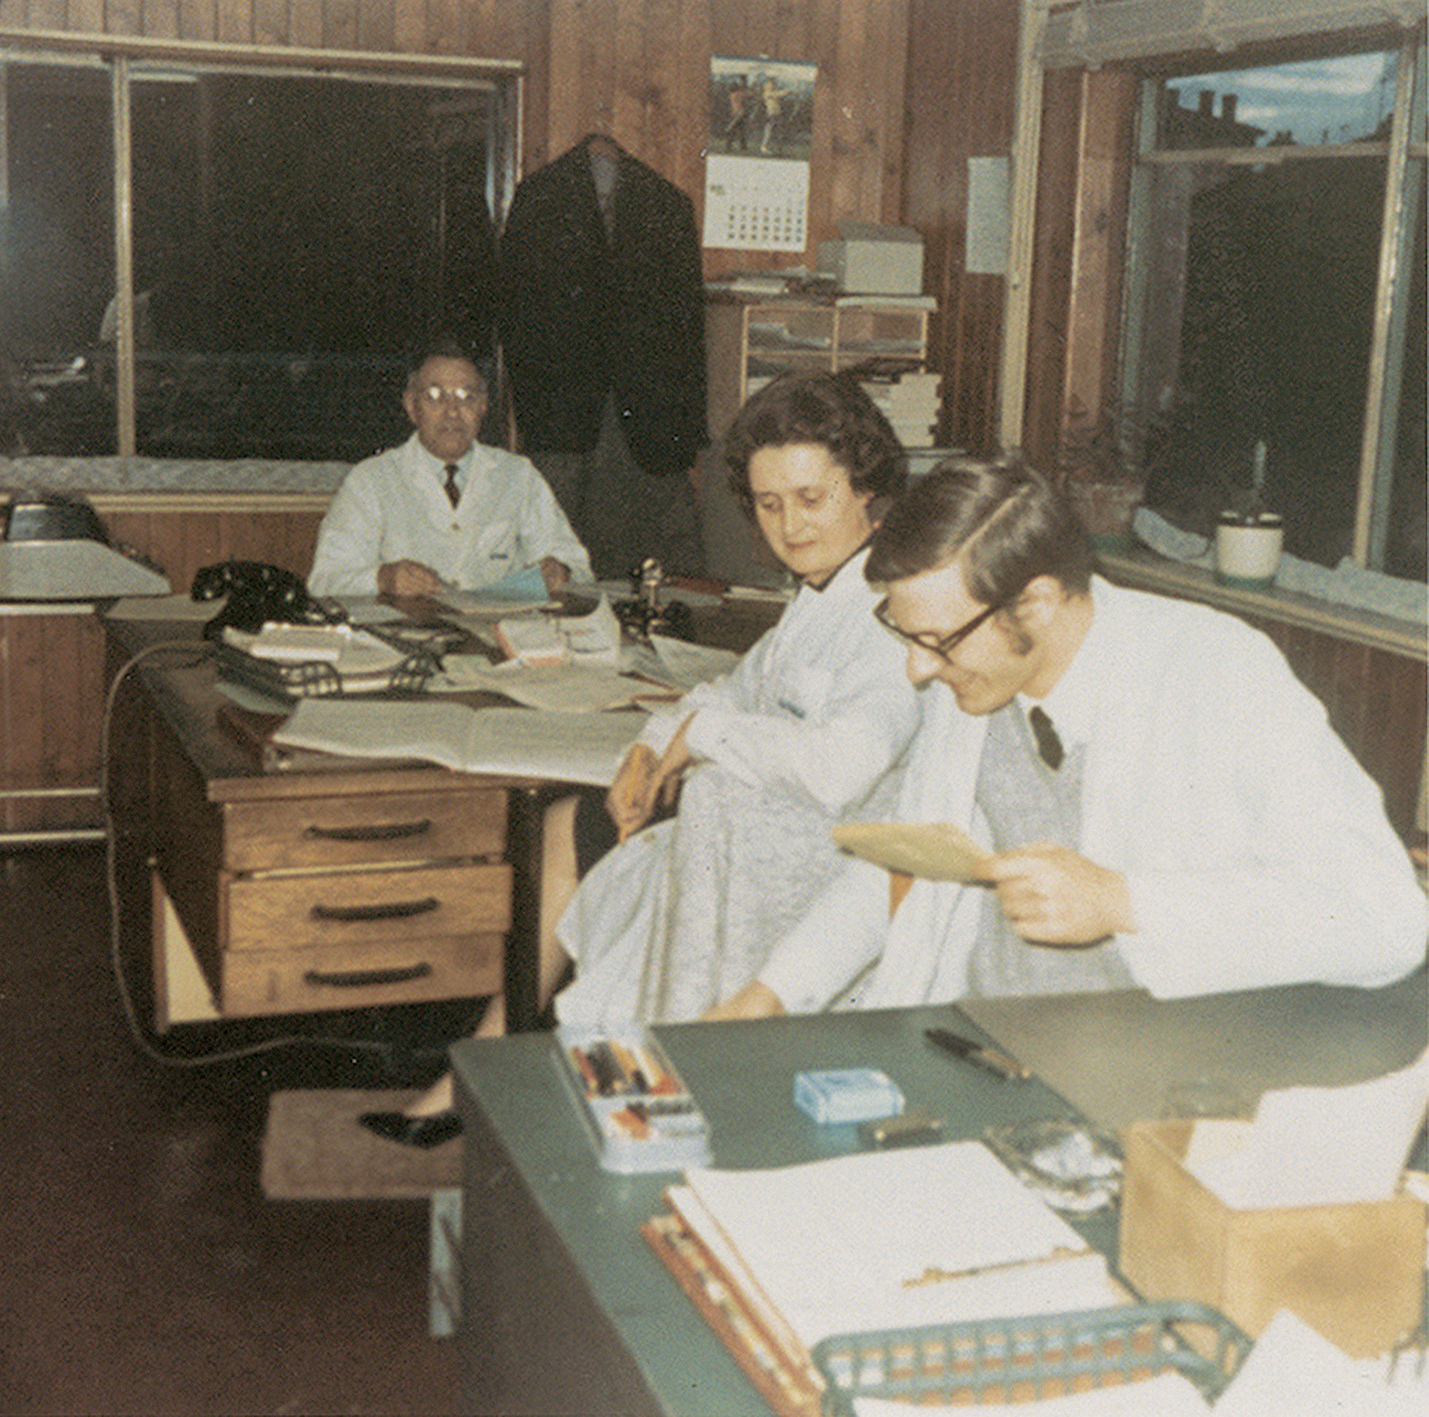 Standard BS 21 desk. Typing and accountancy office, Ferembal building, Nancy, ca. 1970.